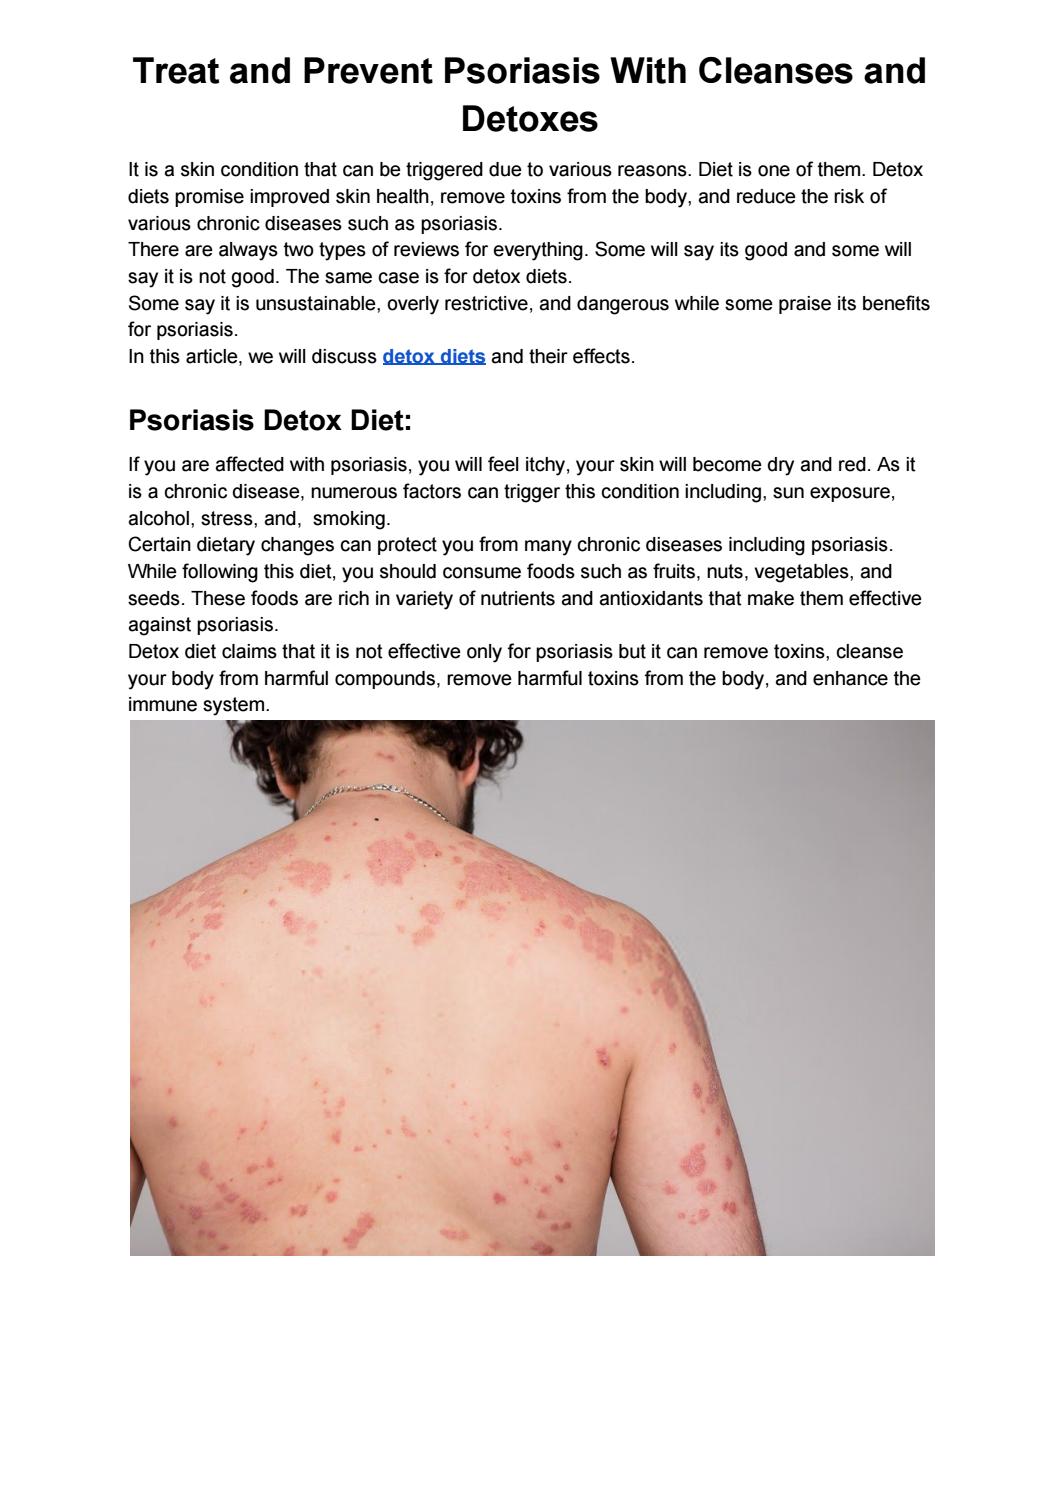 Instead of relying solely on dietary detoxes and cleanses, it's recommended that individuals with psoriasis work with a healthcare professional to develop a comprehensive treatment plan. This may include medications, topical treatments, light therapy, and lifestyle modifications such as stress reduction and a healthy diet. While dietary changes can be beneficial for overall health, they are unlikely to be a standalone solution for managing psoriasis.